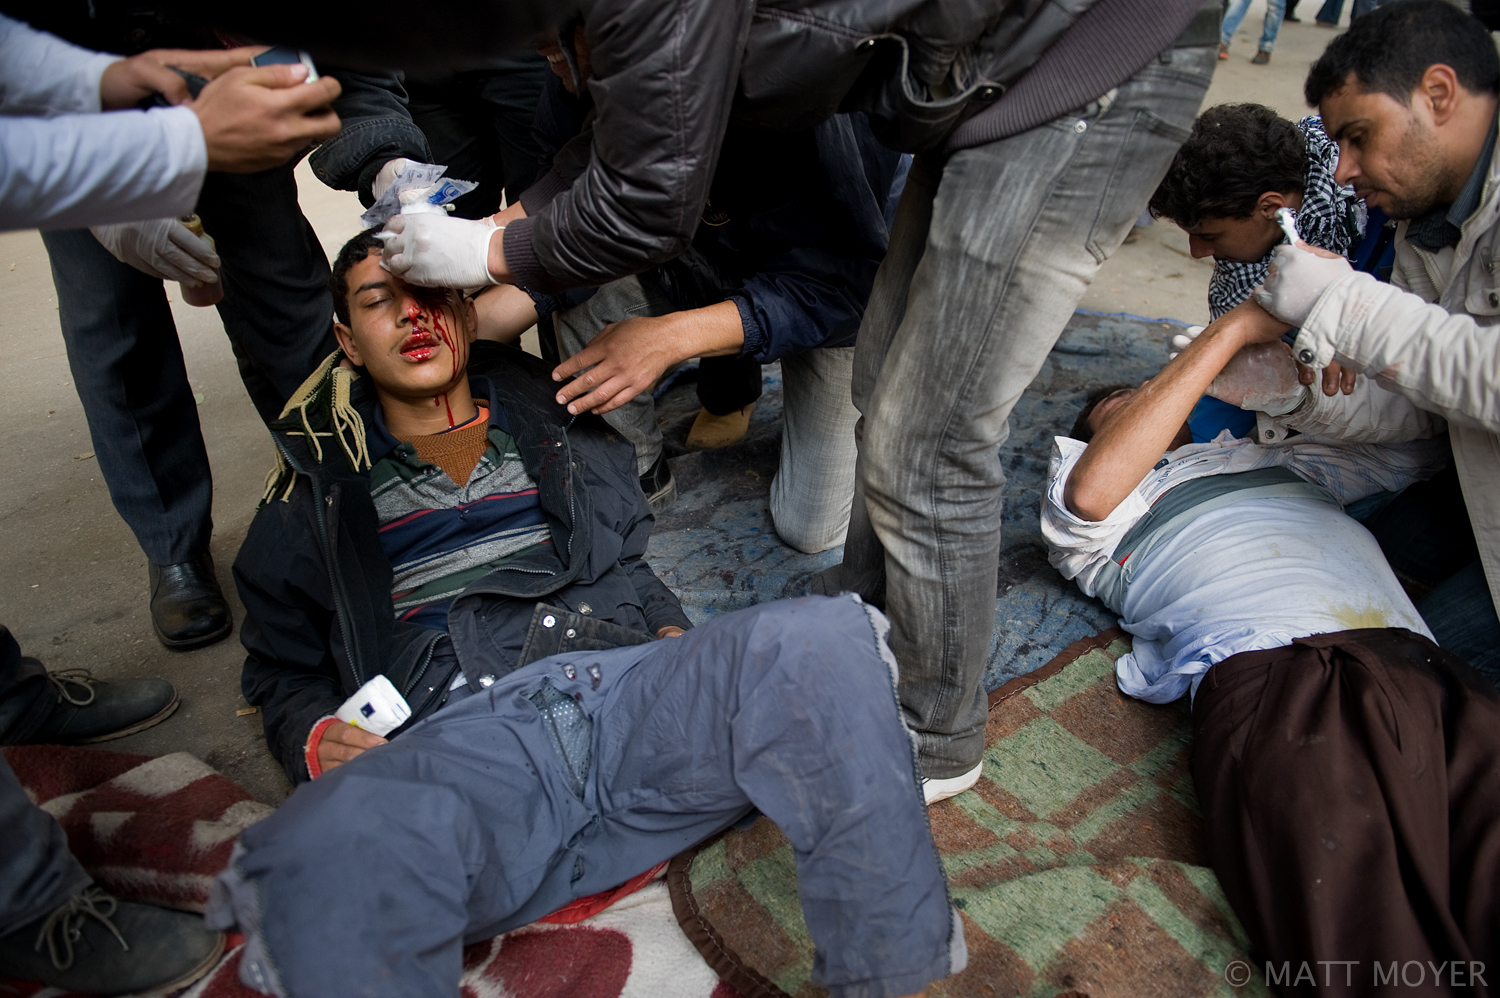  An Egyptian protester is assisted at a makeshift field hospital after being injured in clashes with government forces in Cairo, Egypt. 